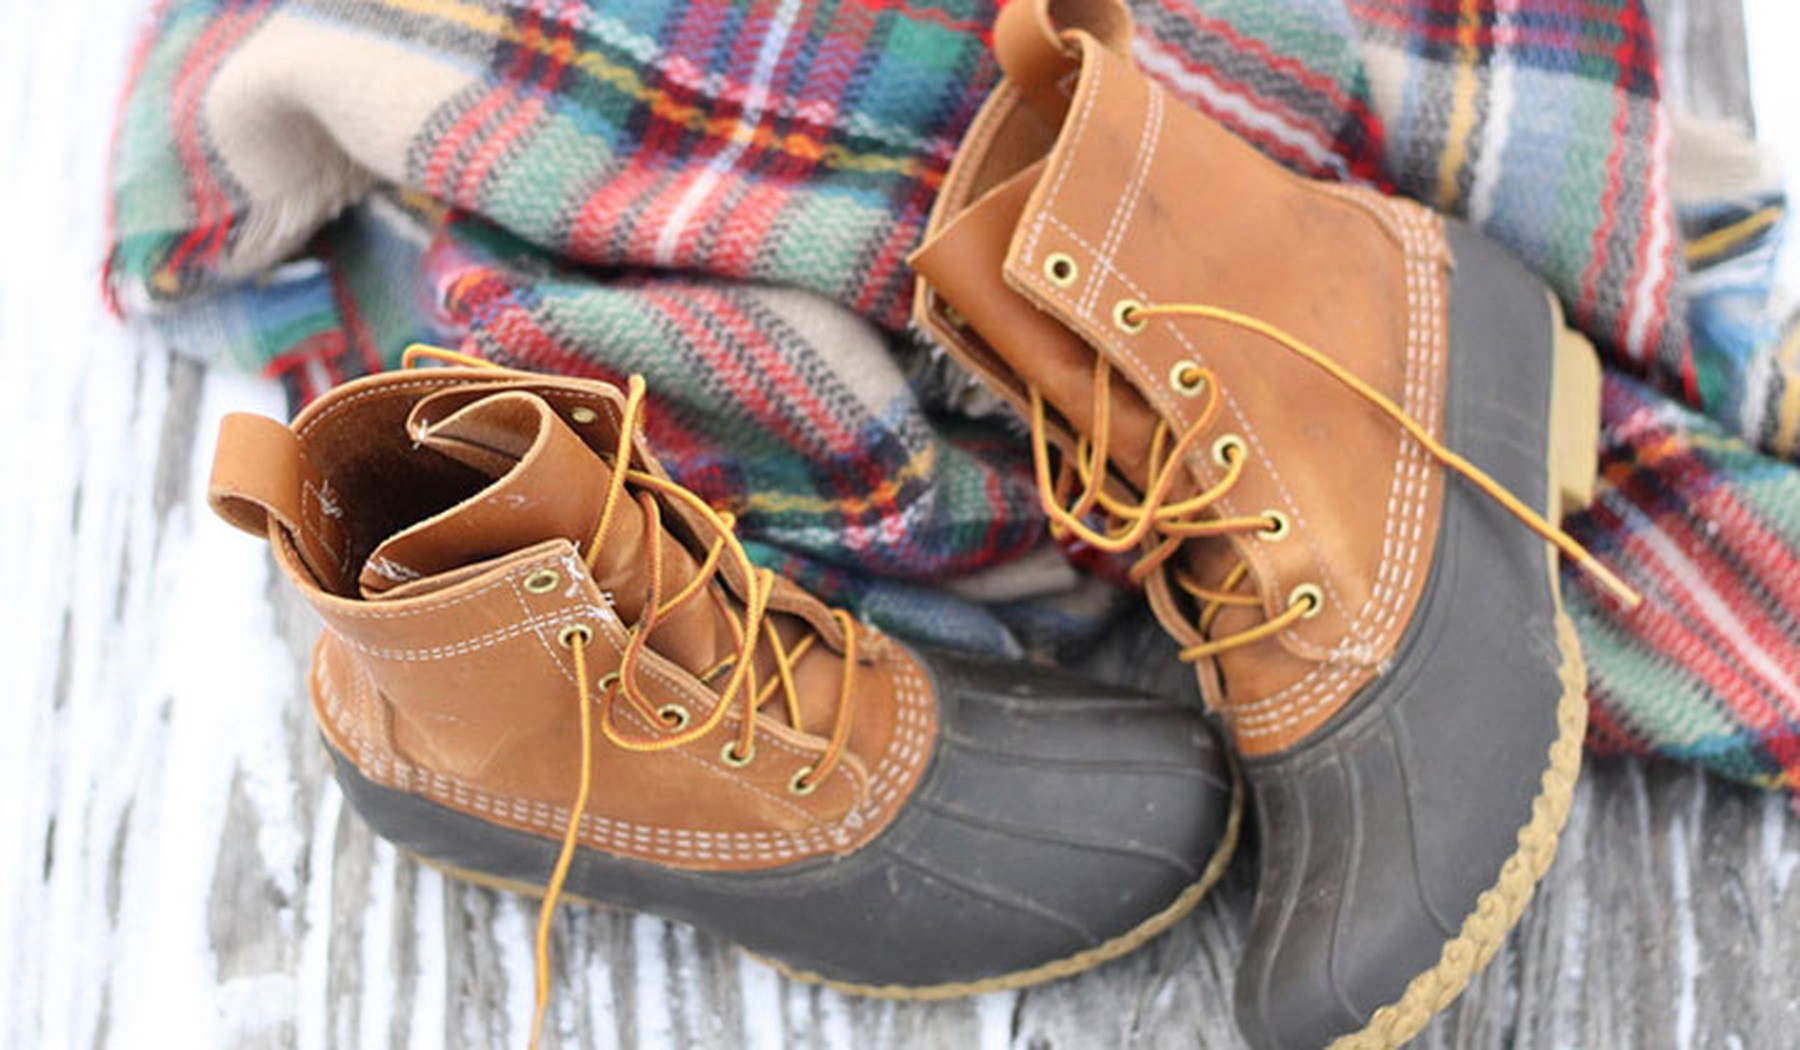 LL Bean Duck boots on red and green flannel blanket